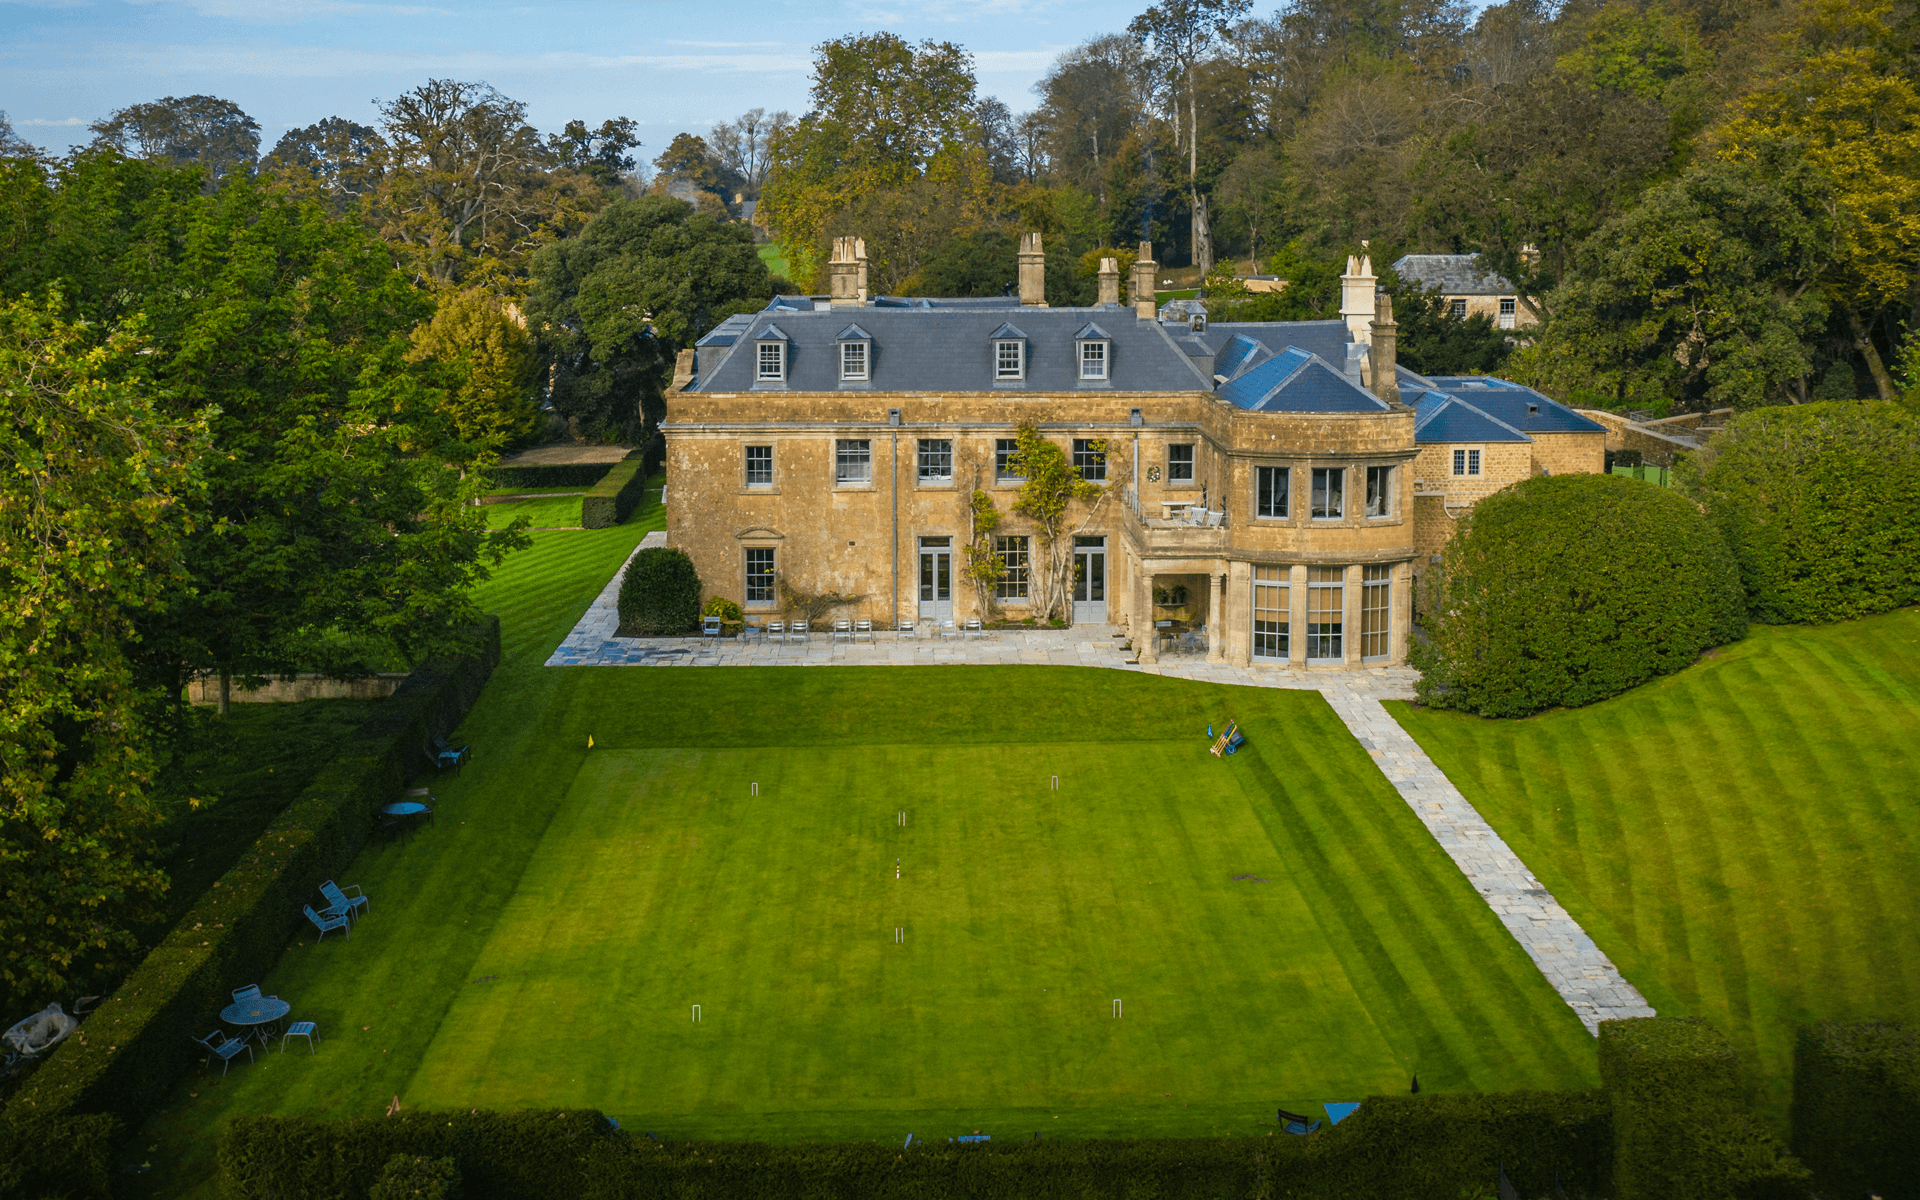 "Mavic 2 Pro" aerial drone photo of "The Newt" Hotel in Somerset